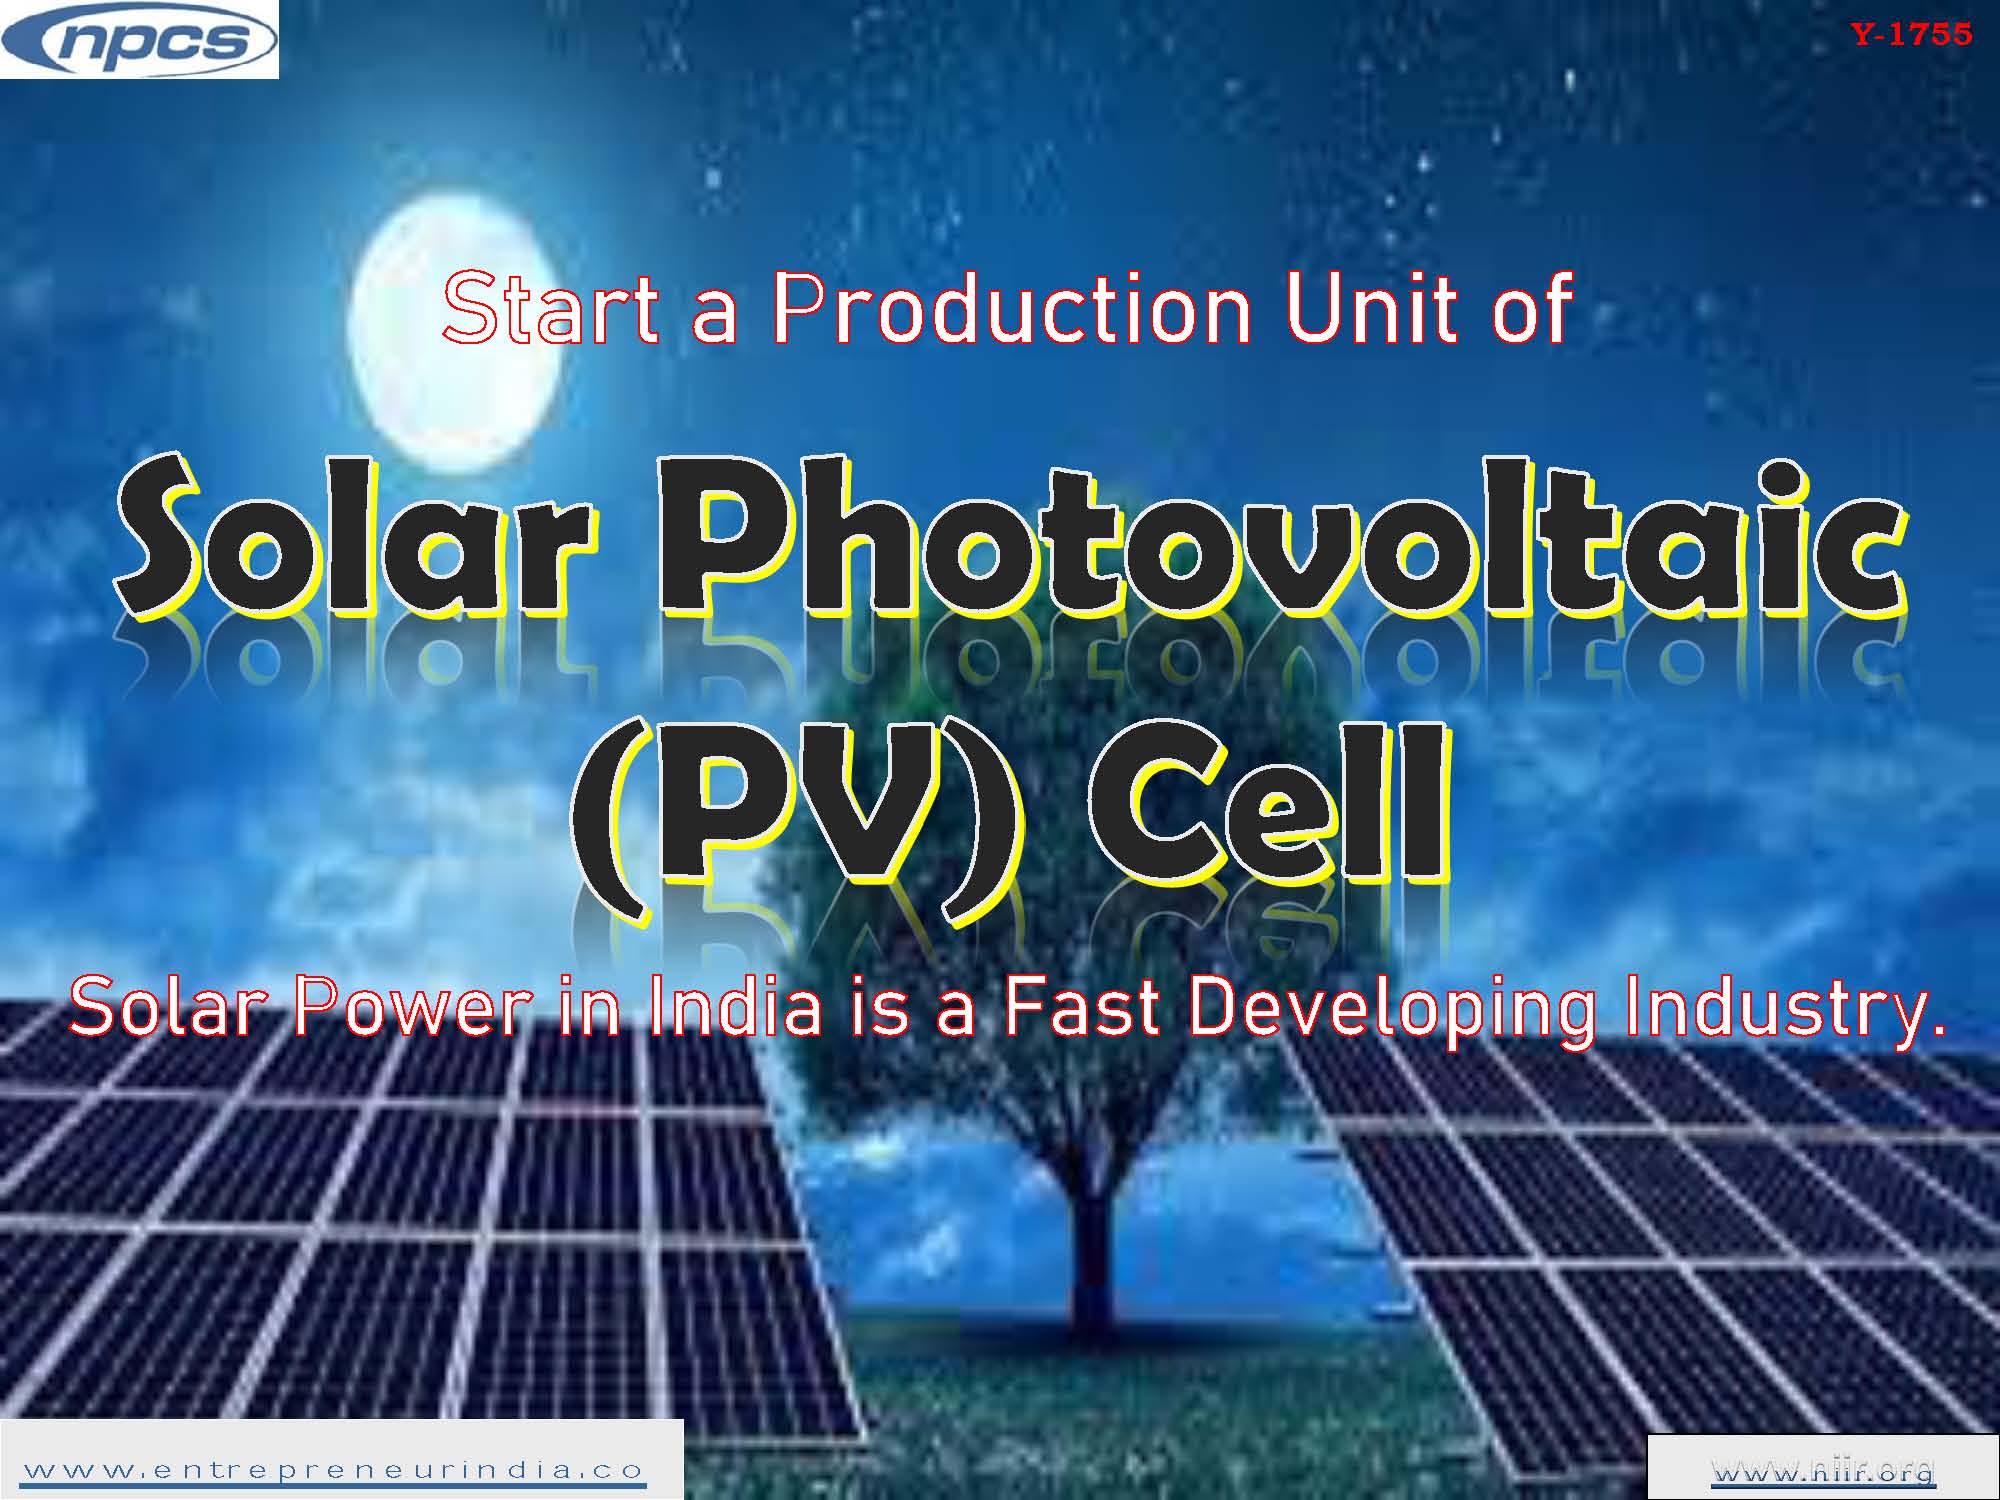 Start a Production Unit of Solar Photovoltaic (PV) Cell Solar Power in India is a Fast Developing Industry